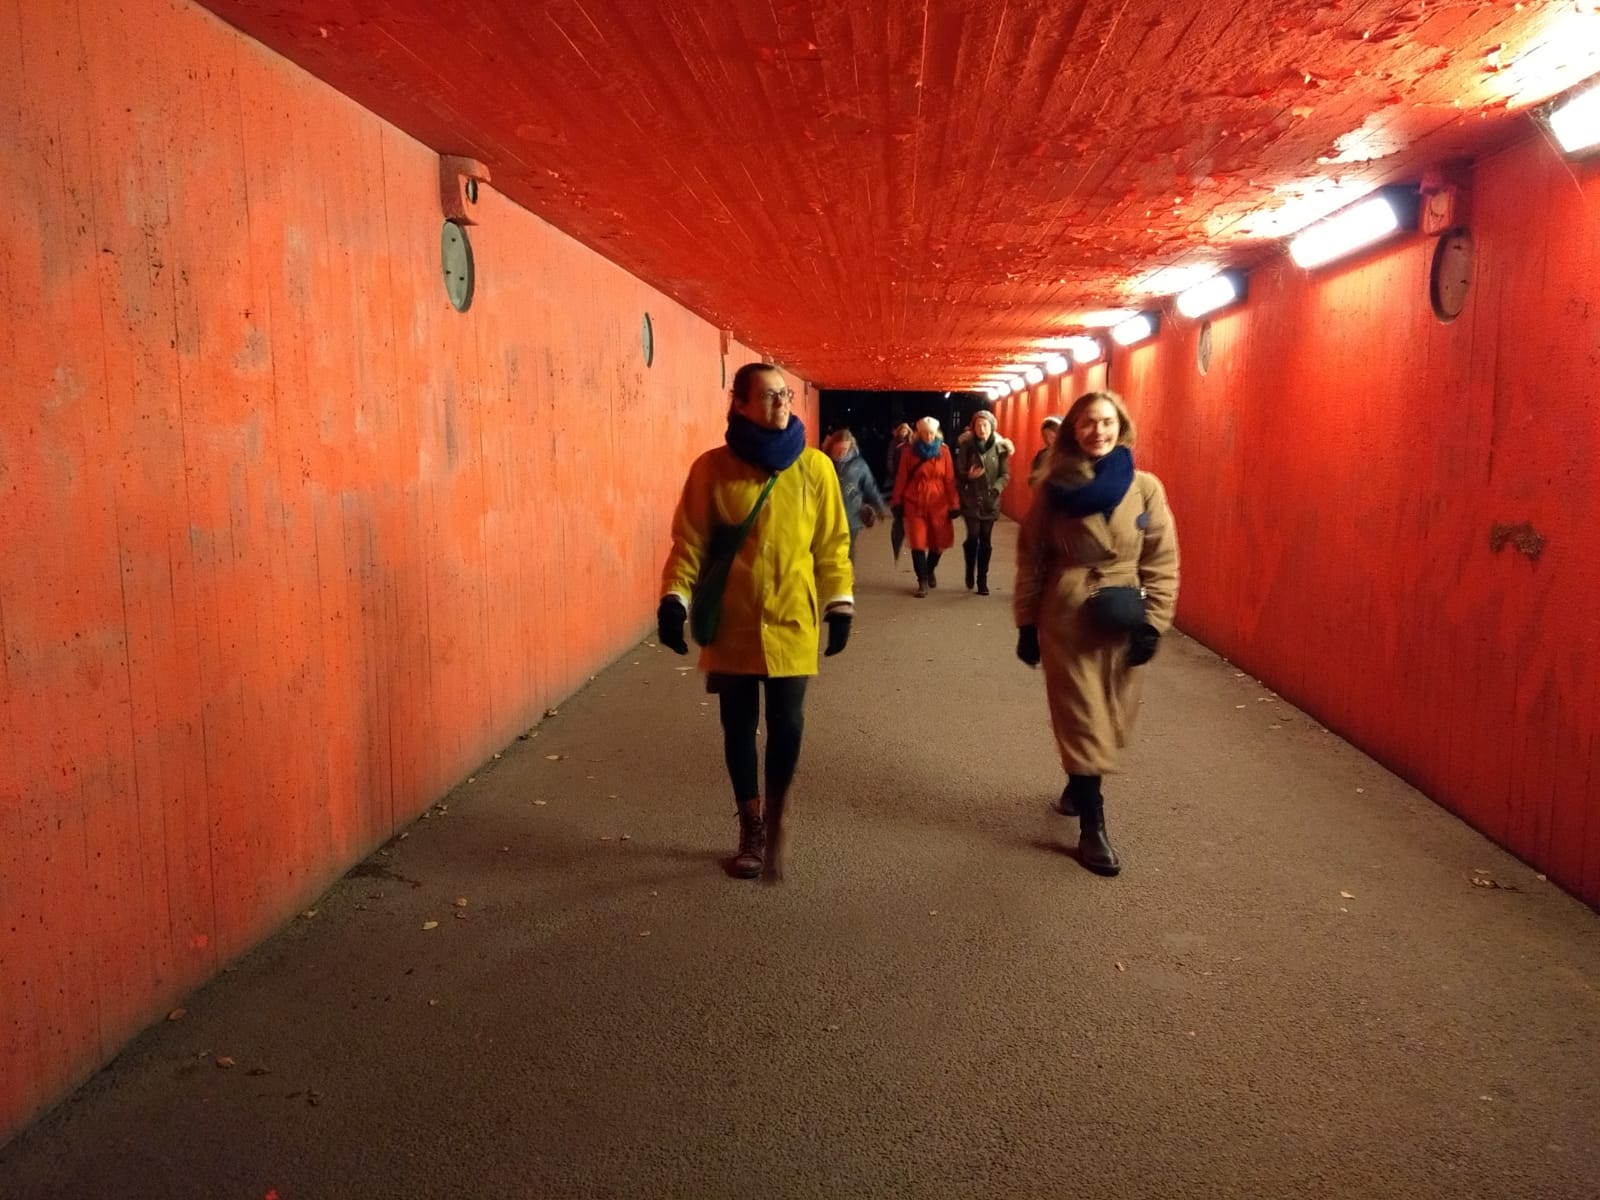 people walking towards the camera inside an underground tunnel that's painted red